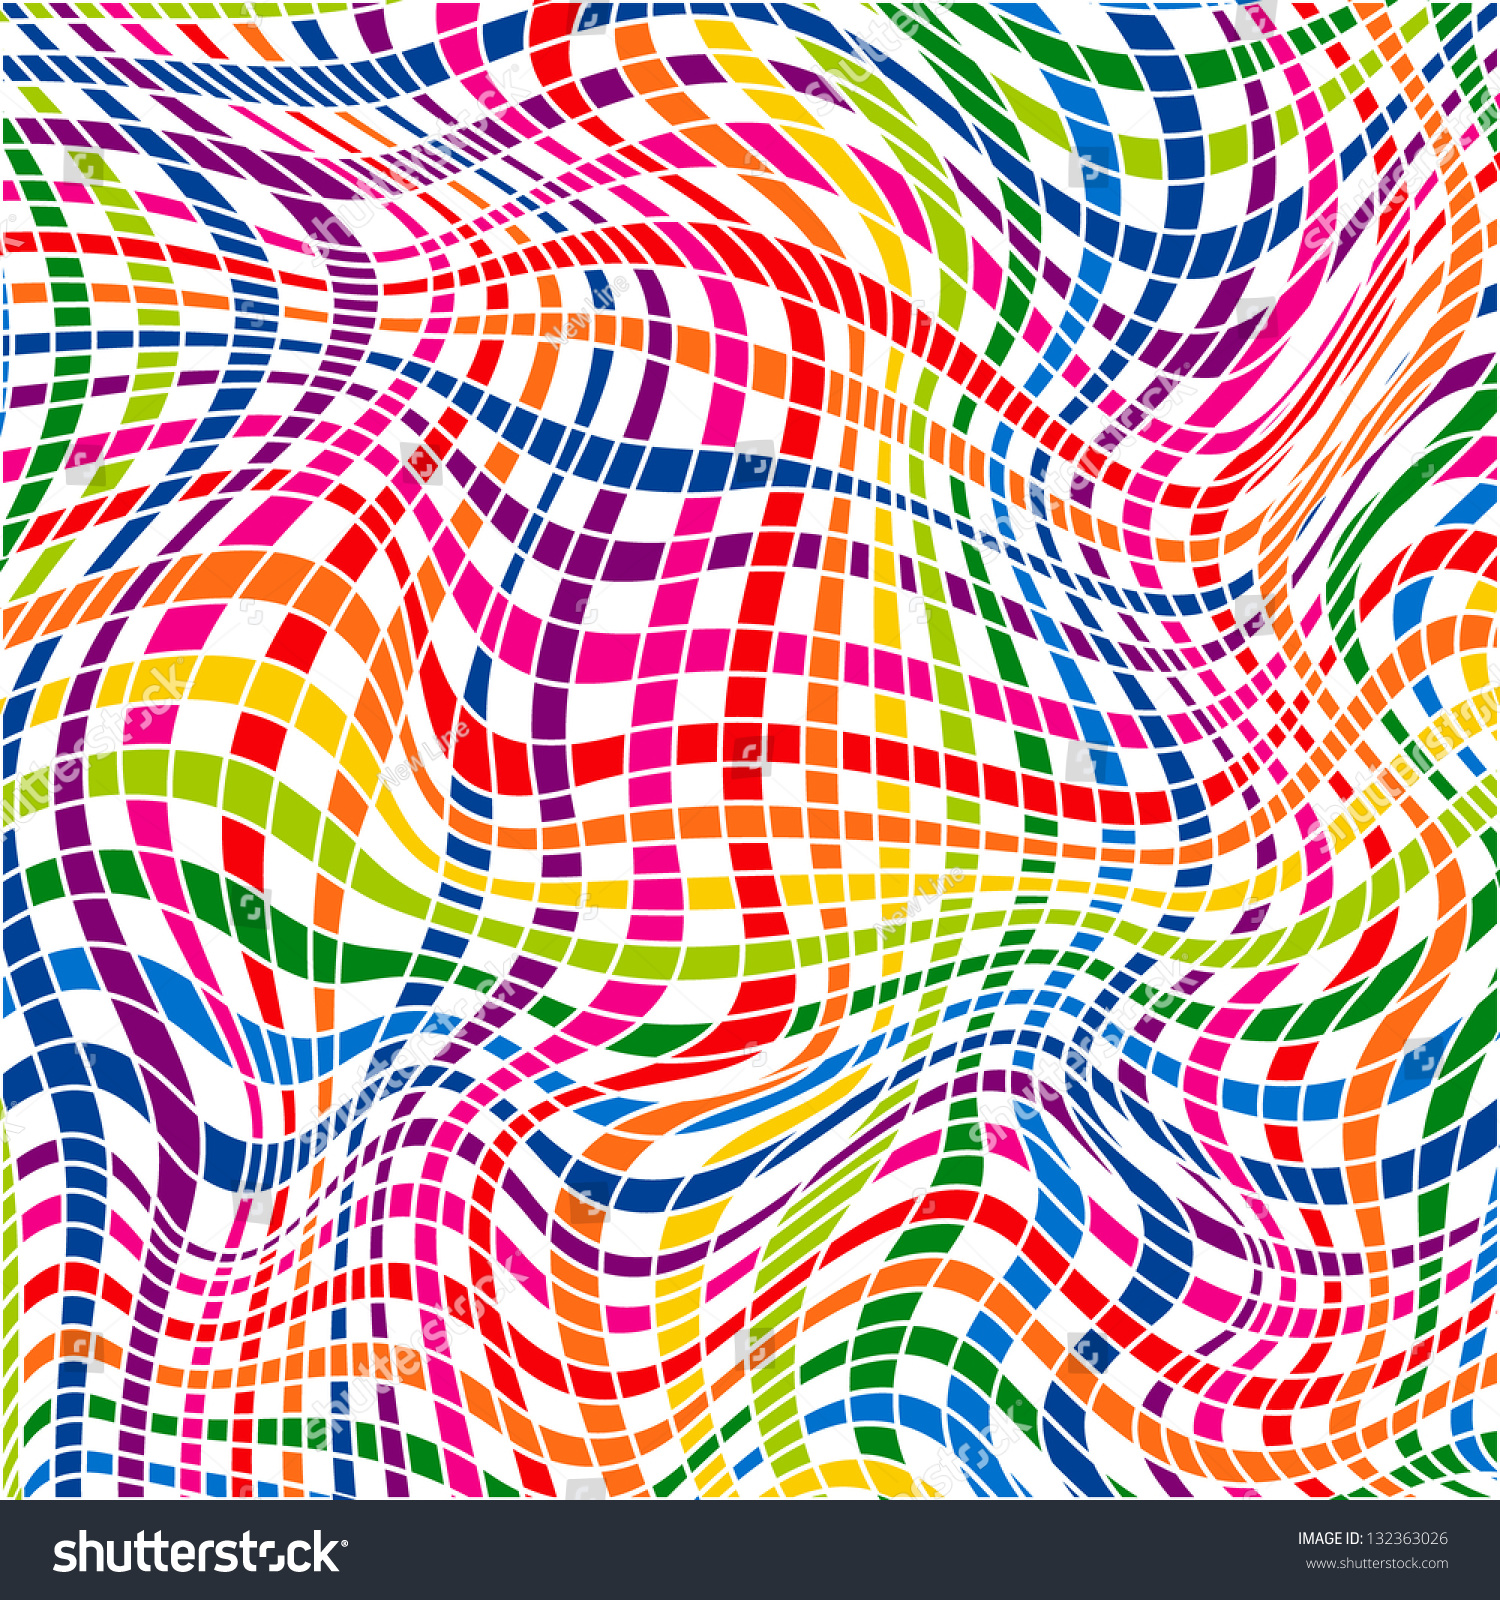 Colorful Striped Seamless Pattern Vector Illustration Shutterstock